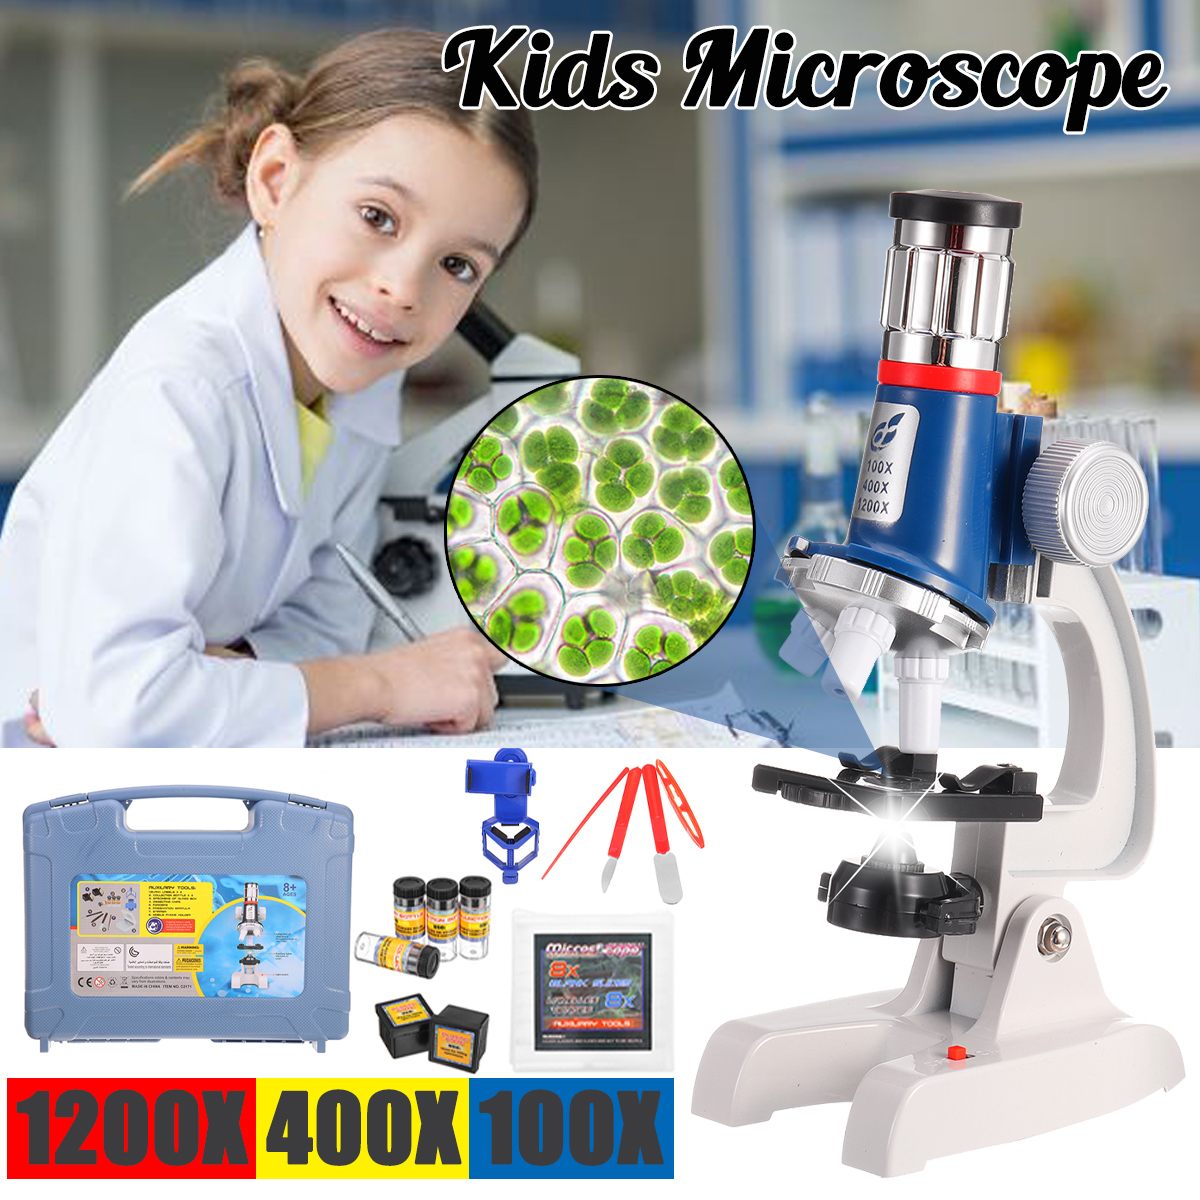 1200X-400X-100X-Magnification-Kids-Microscope-Children-Science-Educational-Toy-1887283-1